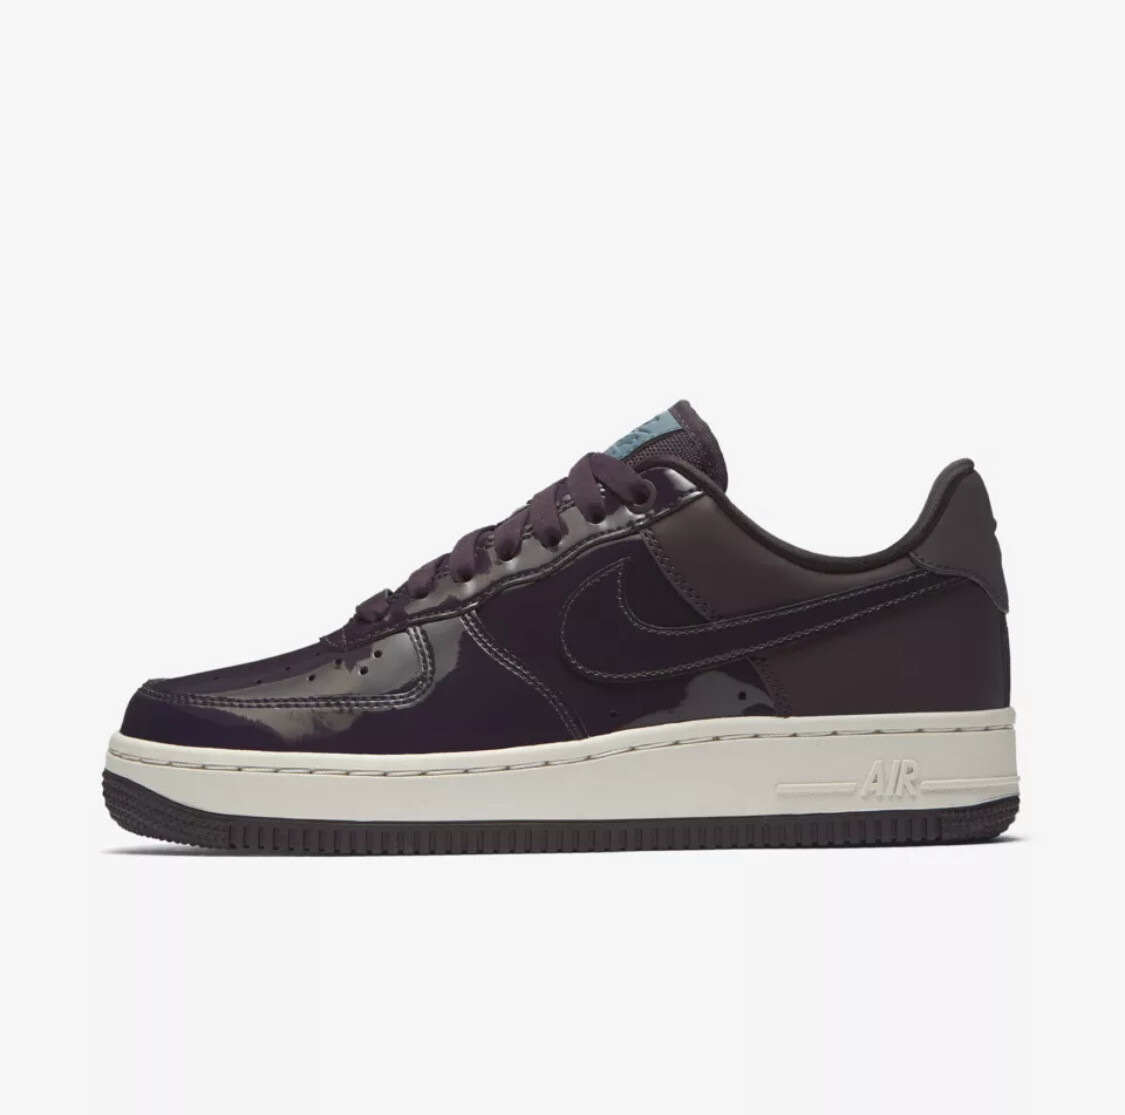 Nike Air Force 1 Low Ruby Rose Port Wine